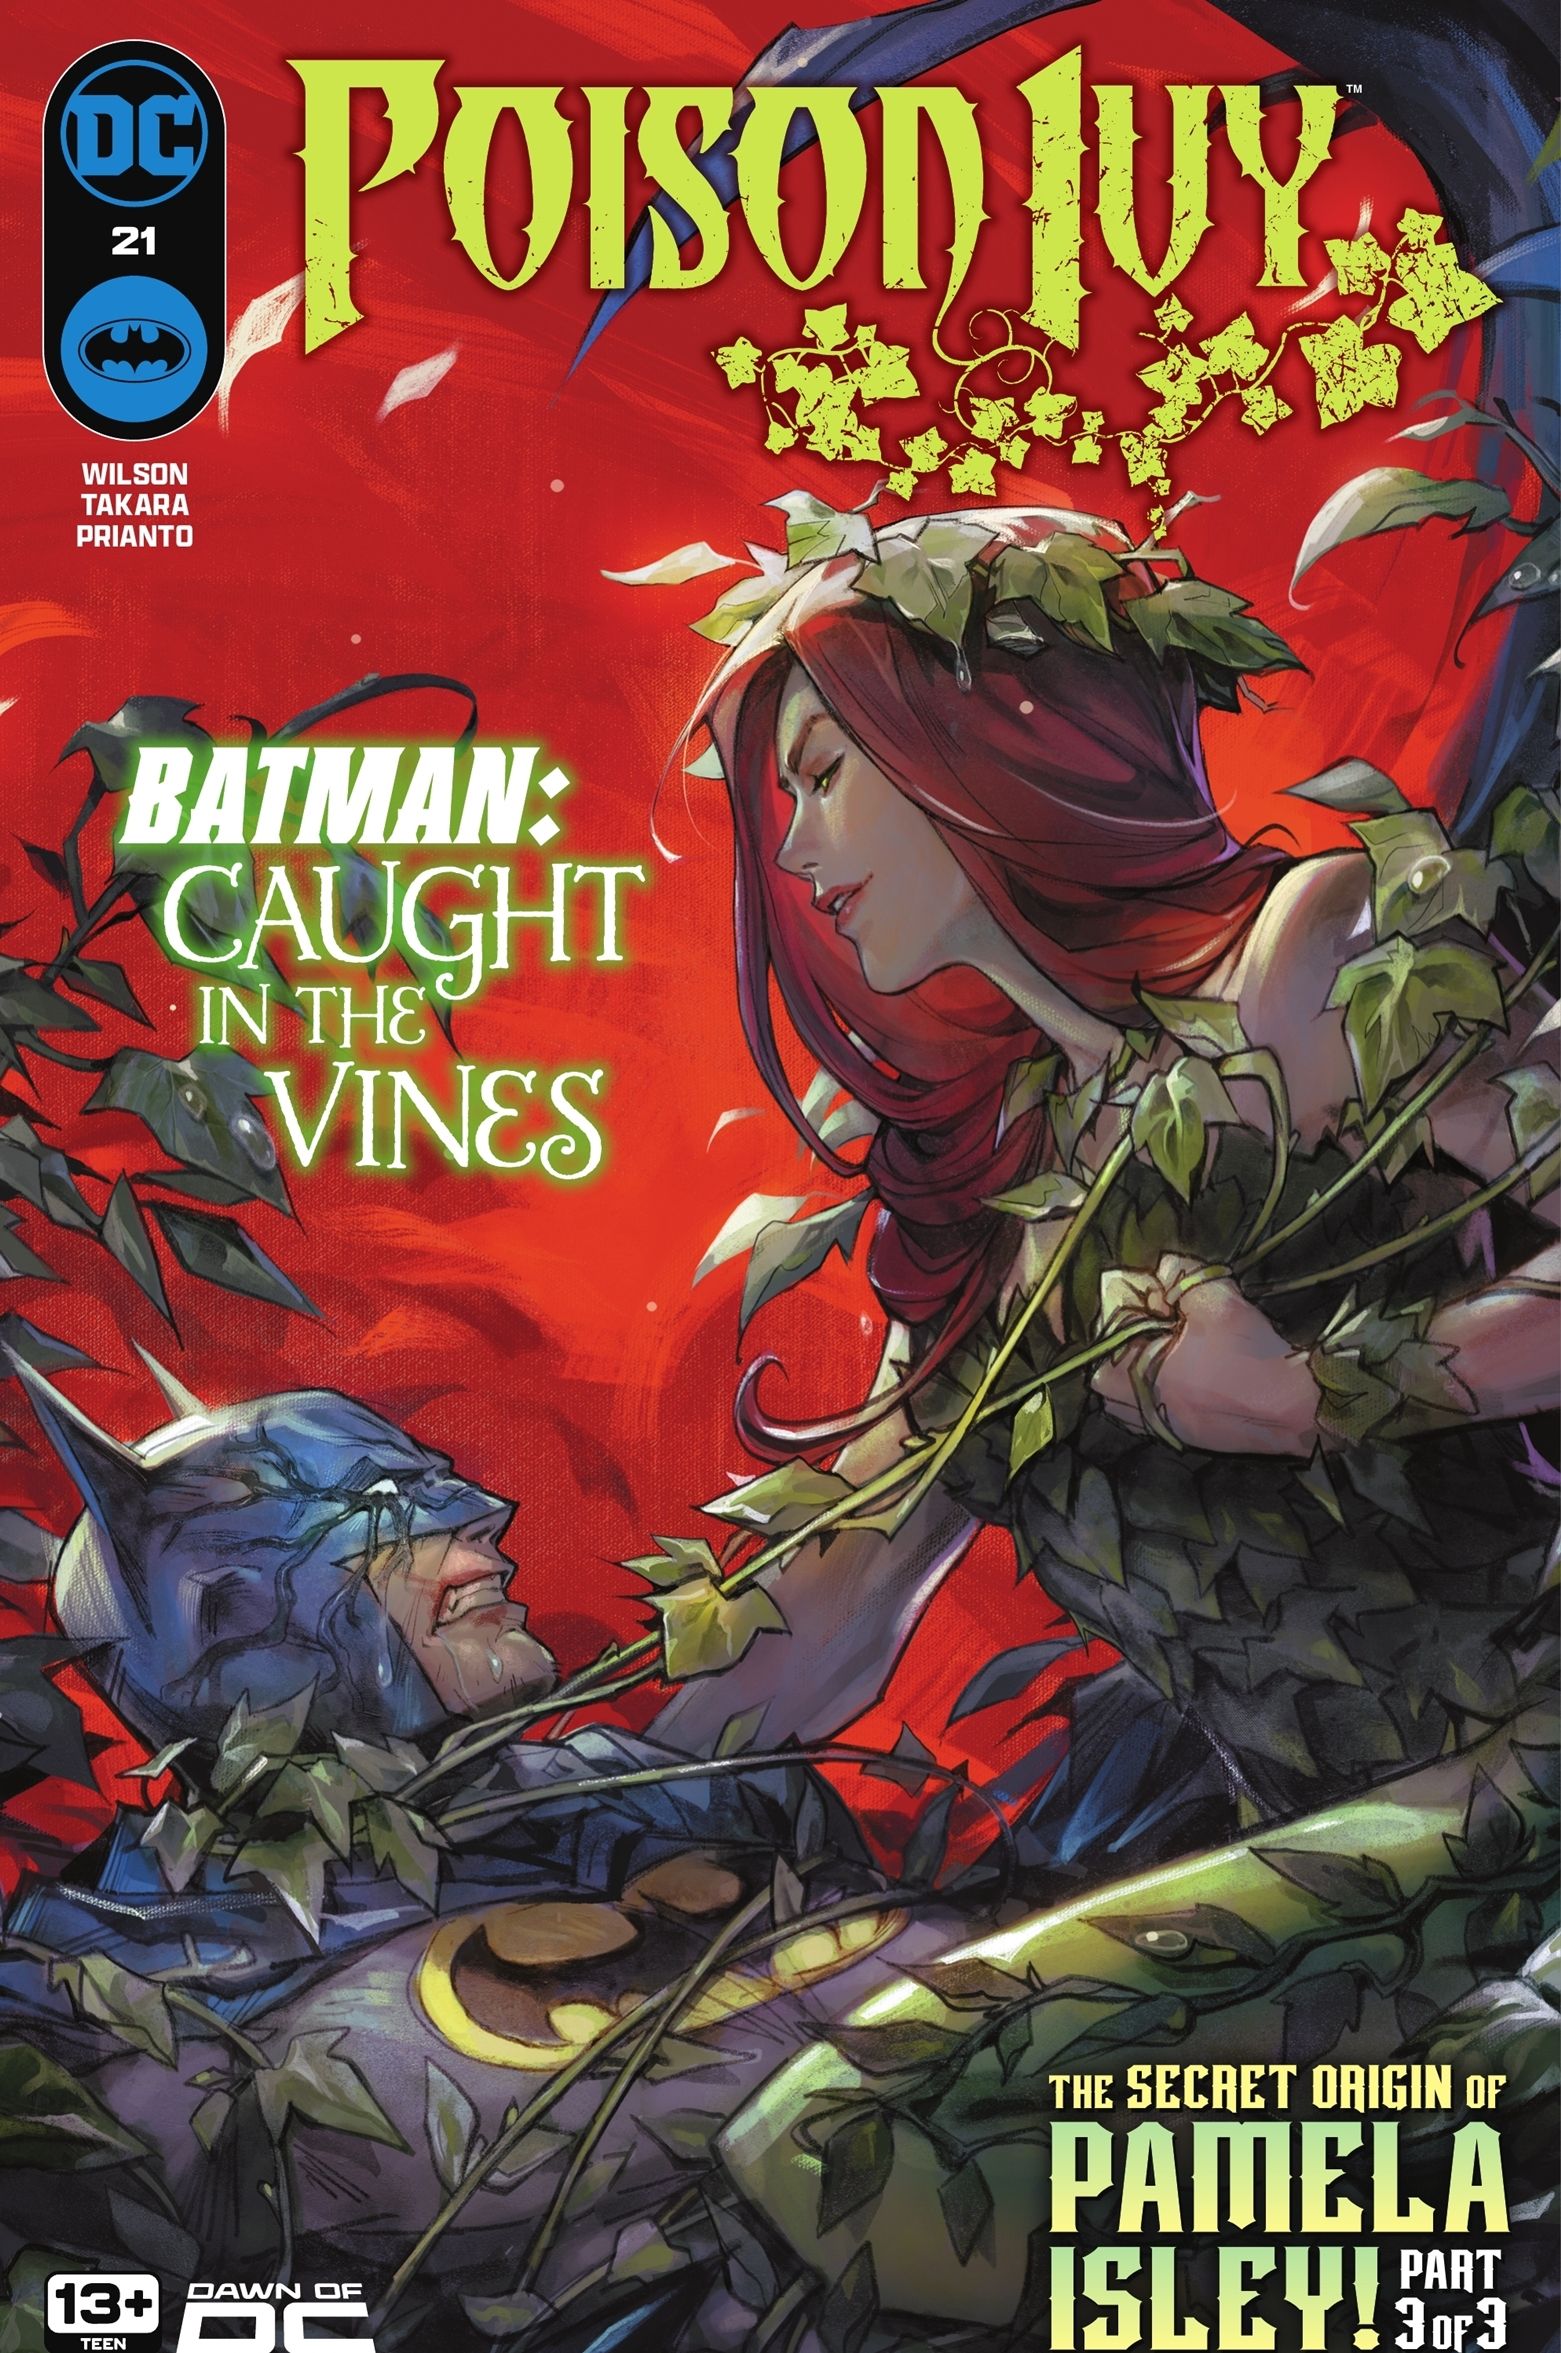 Poison Ivy 21 Main Cover: Poison Ivy twists Batman in her vines.